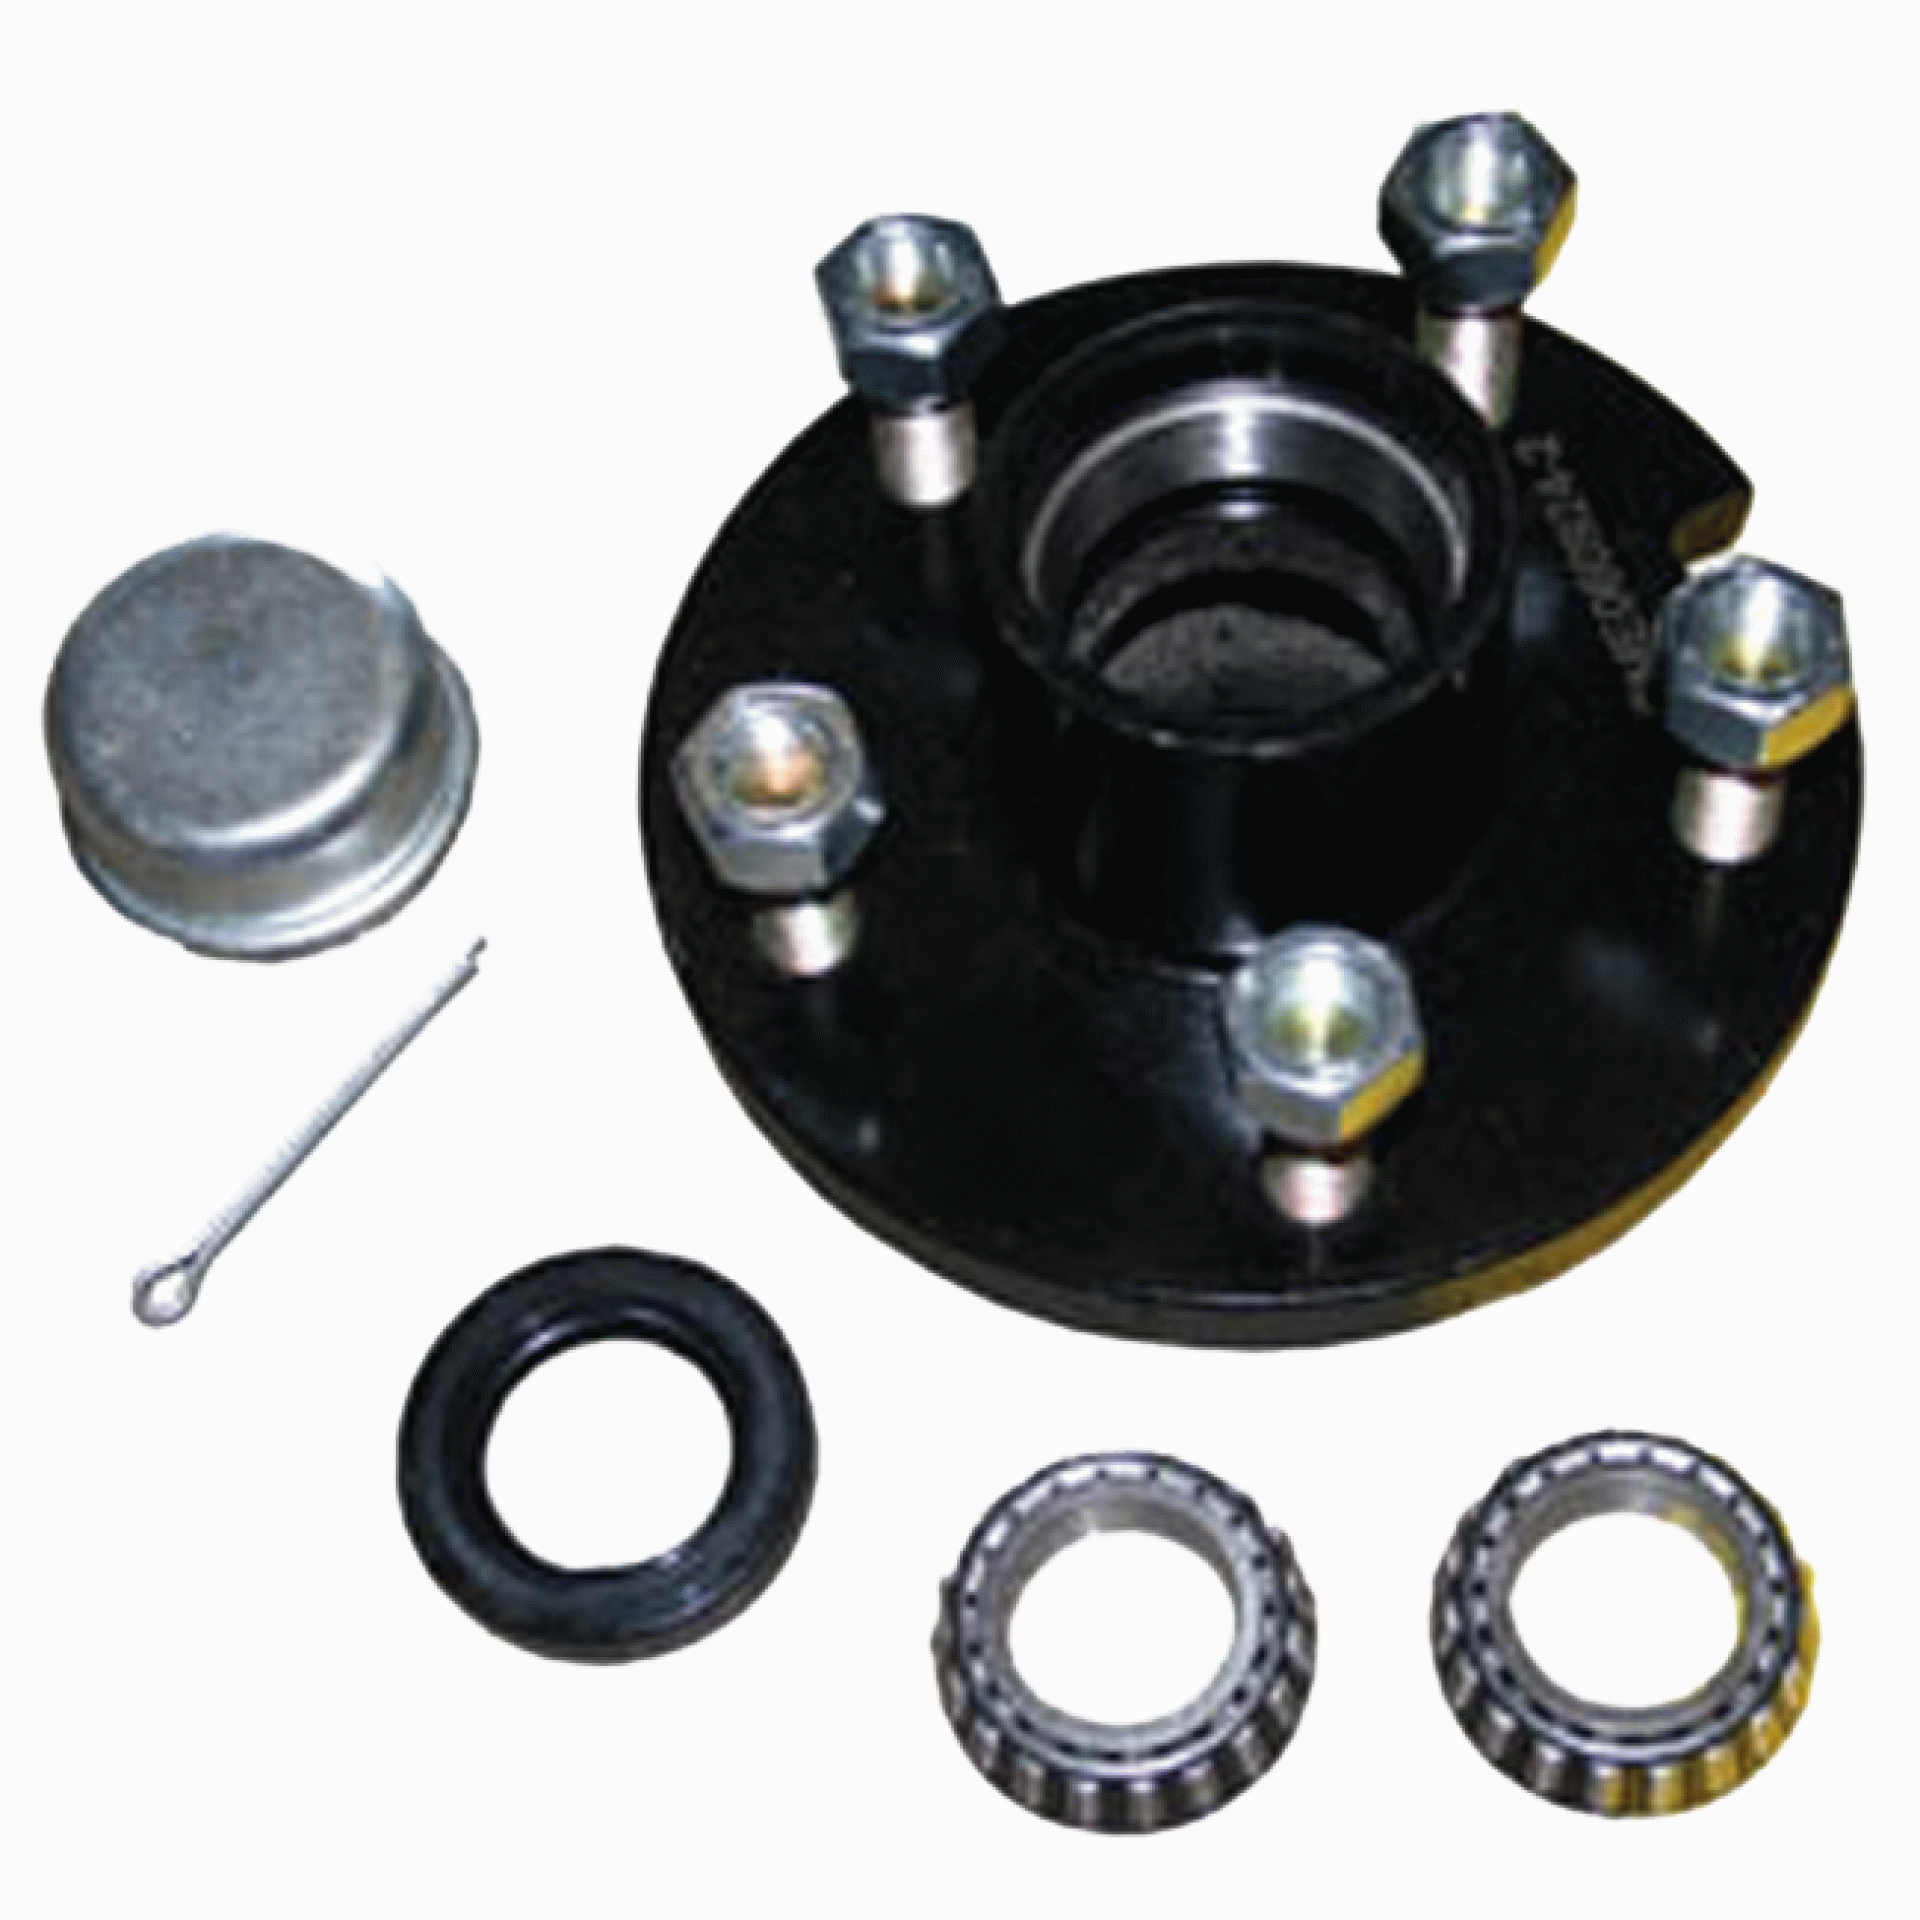 DEXTER MARINE PRODUCTS OF GEORGIA LC | 81087 | 1-1/16" SPINDLE 545 1350 LB. CAPACITY 44649 BEARING